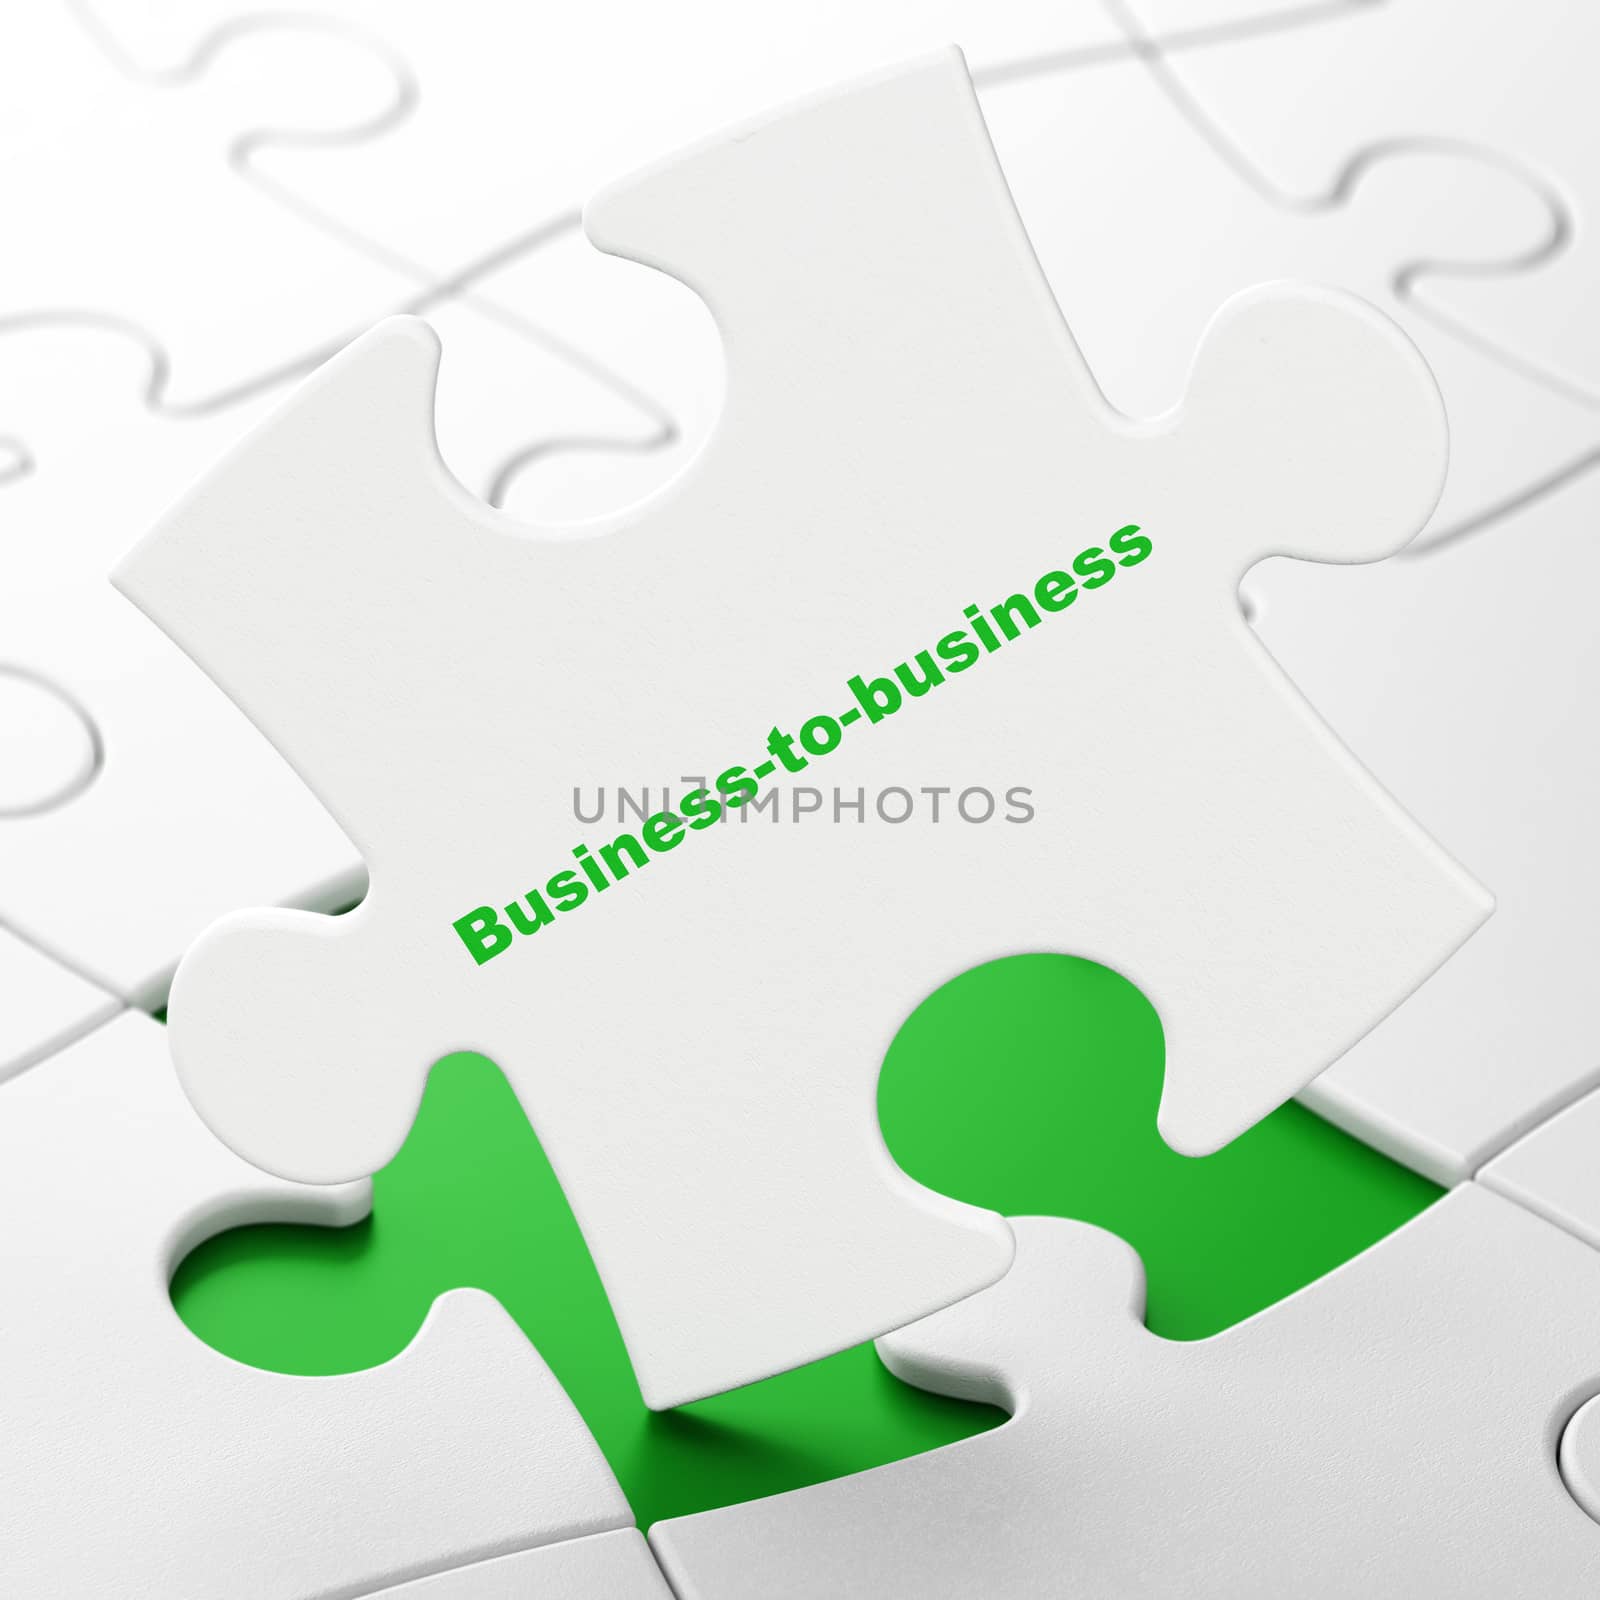 Finance concept: Business-to-business on White puzzle pieces background, 3D rendering